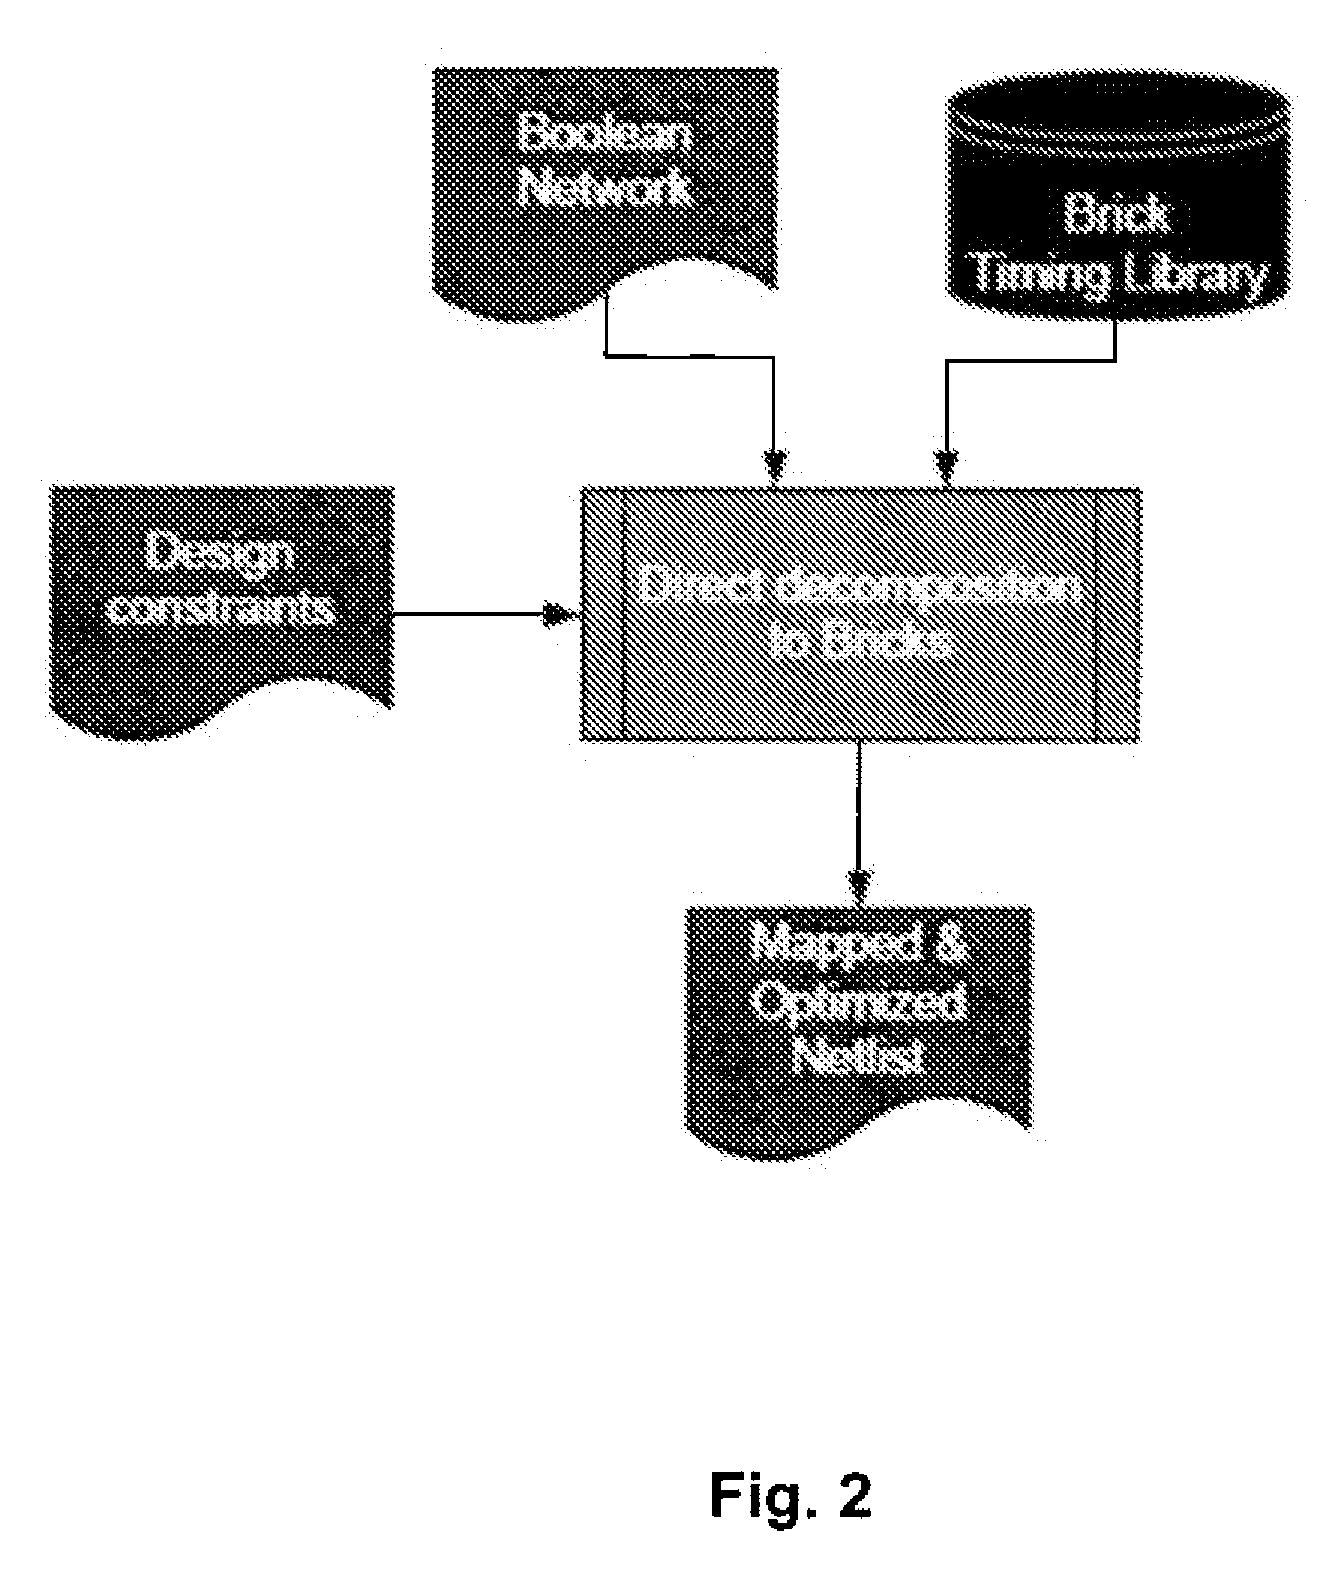 Method And System For Mapping A Boolean Logic Network To A Limited Set Of Application-Domain Specific Logic Cells